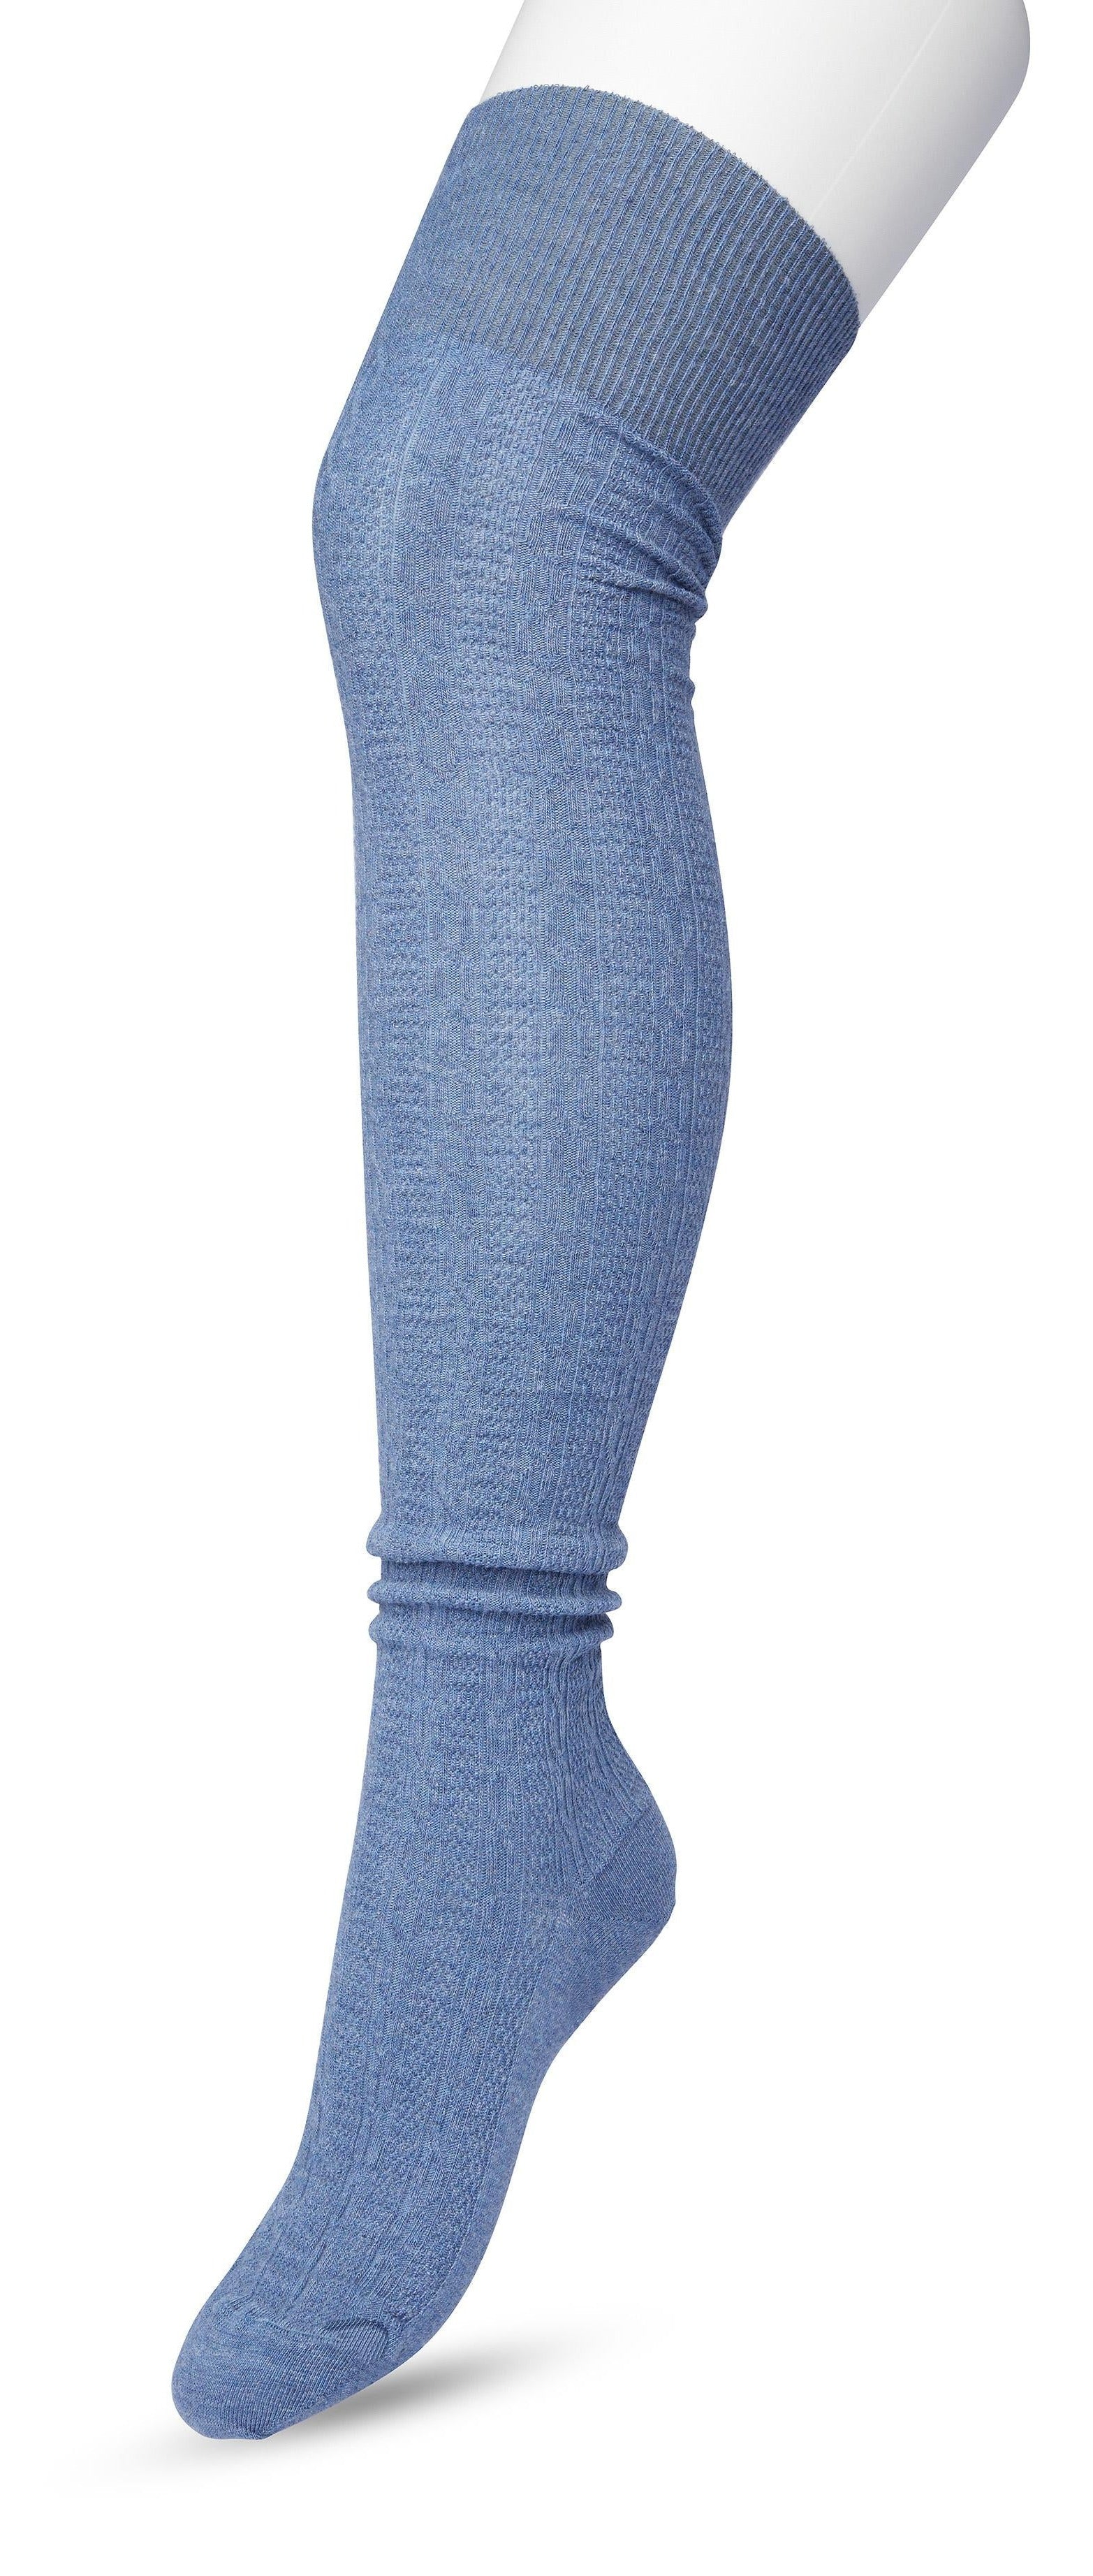 Bonnie Doon Cable Over-Knee Sock - Denim Blue (blue heather jeans) cotton knitted over the knee socks with a cable knit style ribbed pattern 